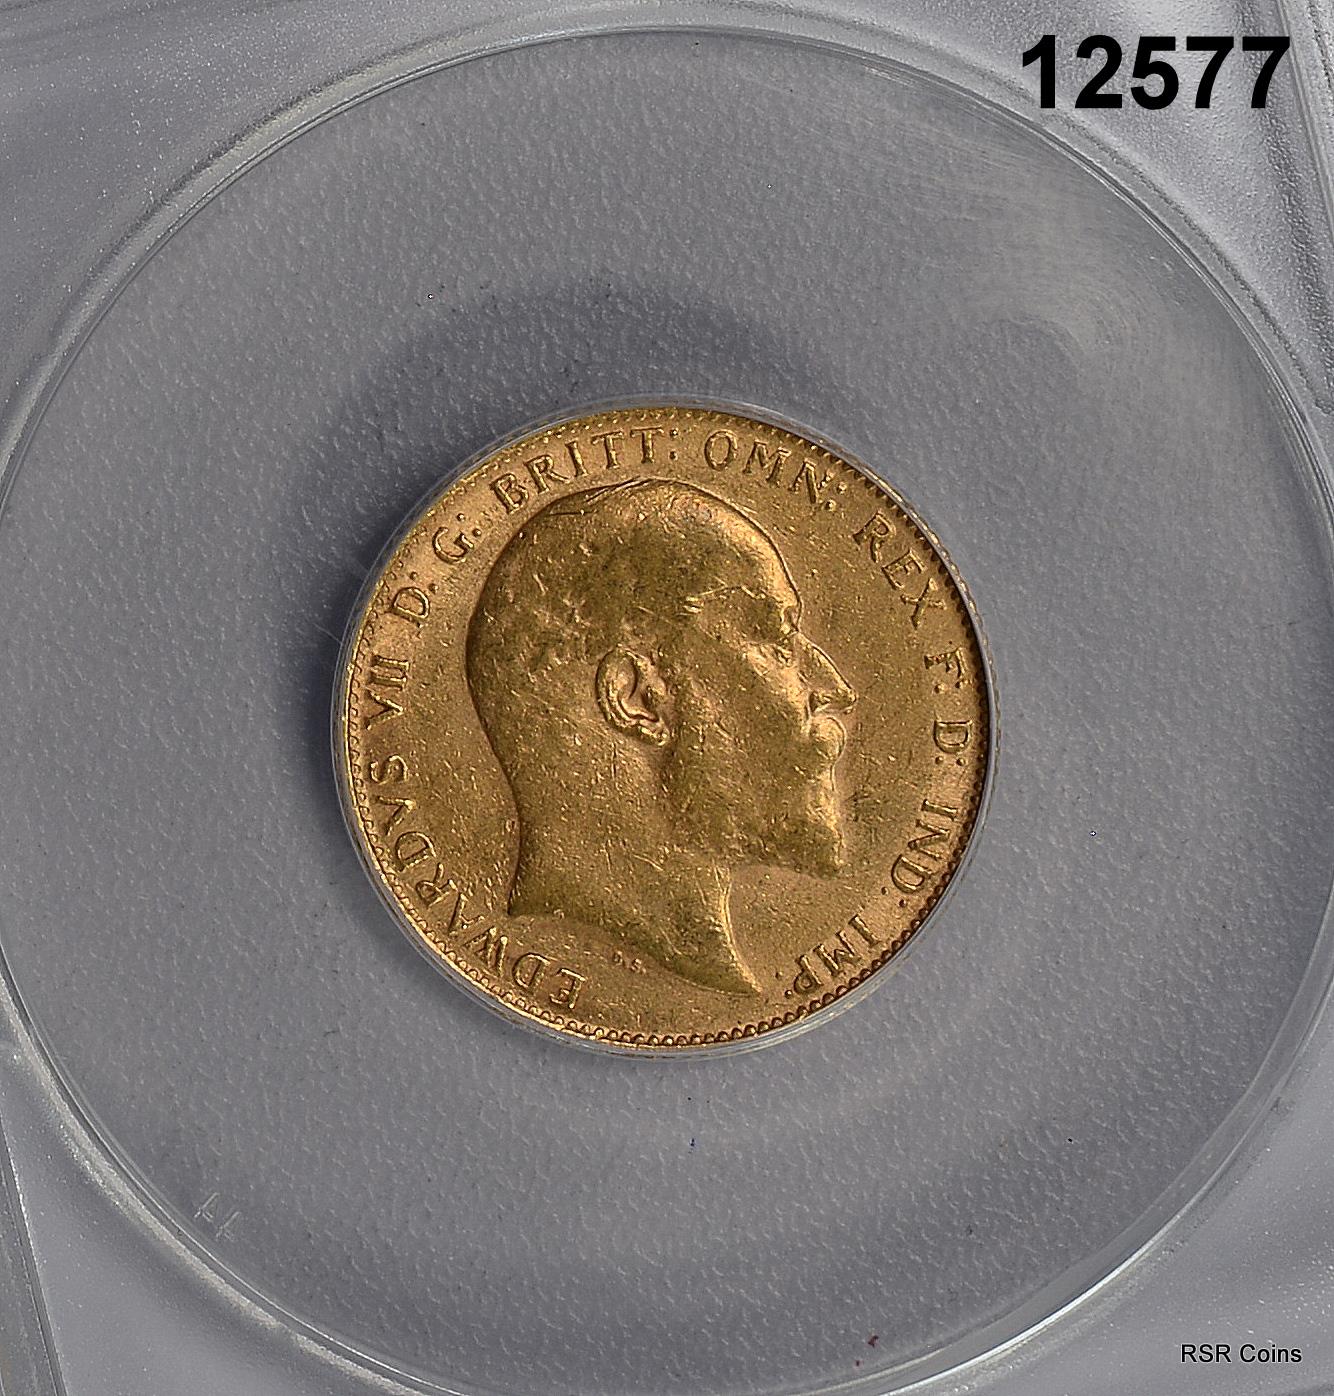 1906 GREAT BRITAIN GOLD SOVEREIGN ANACS CERTIFIED AU55 NICE! #12577